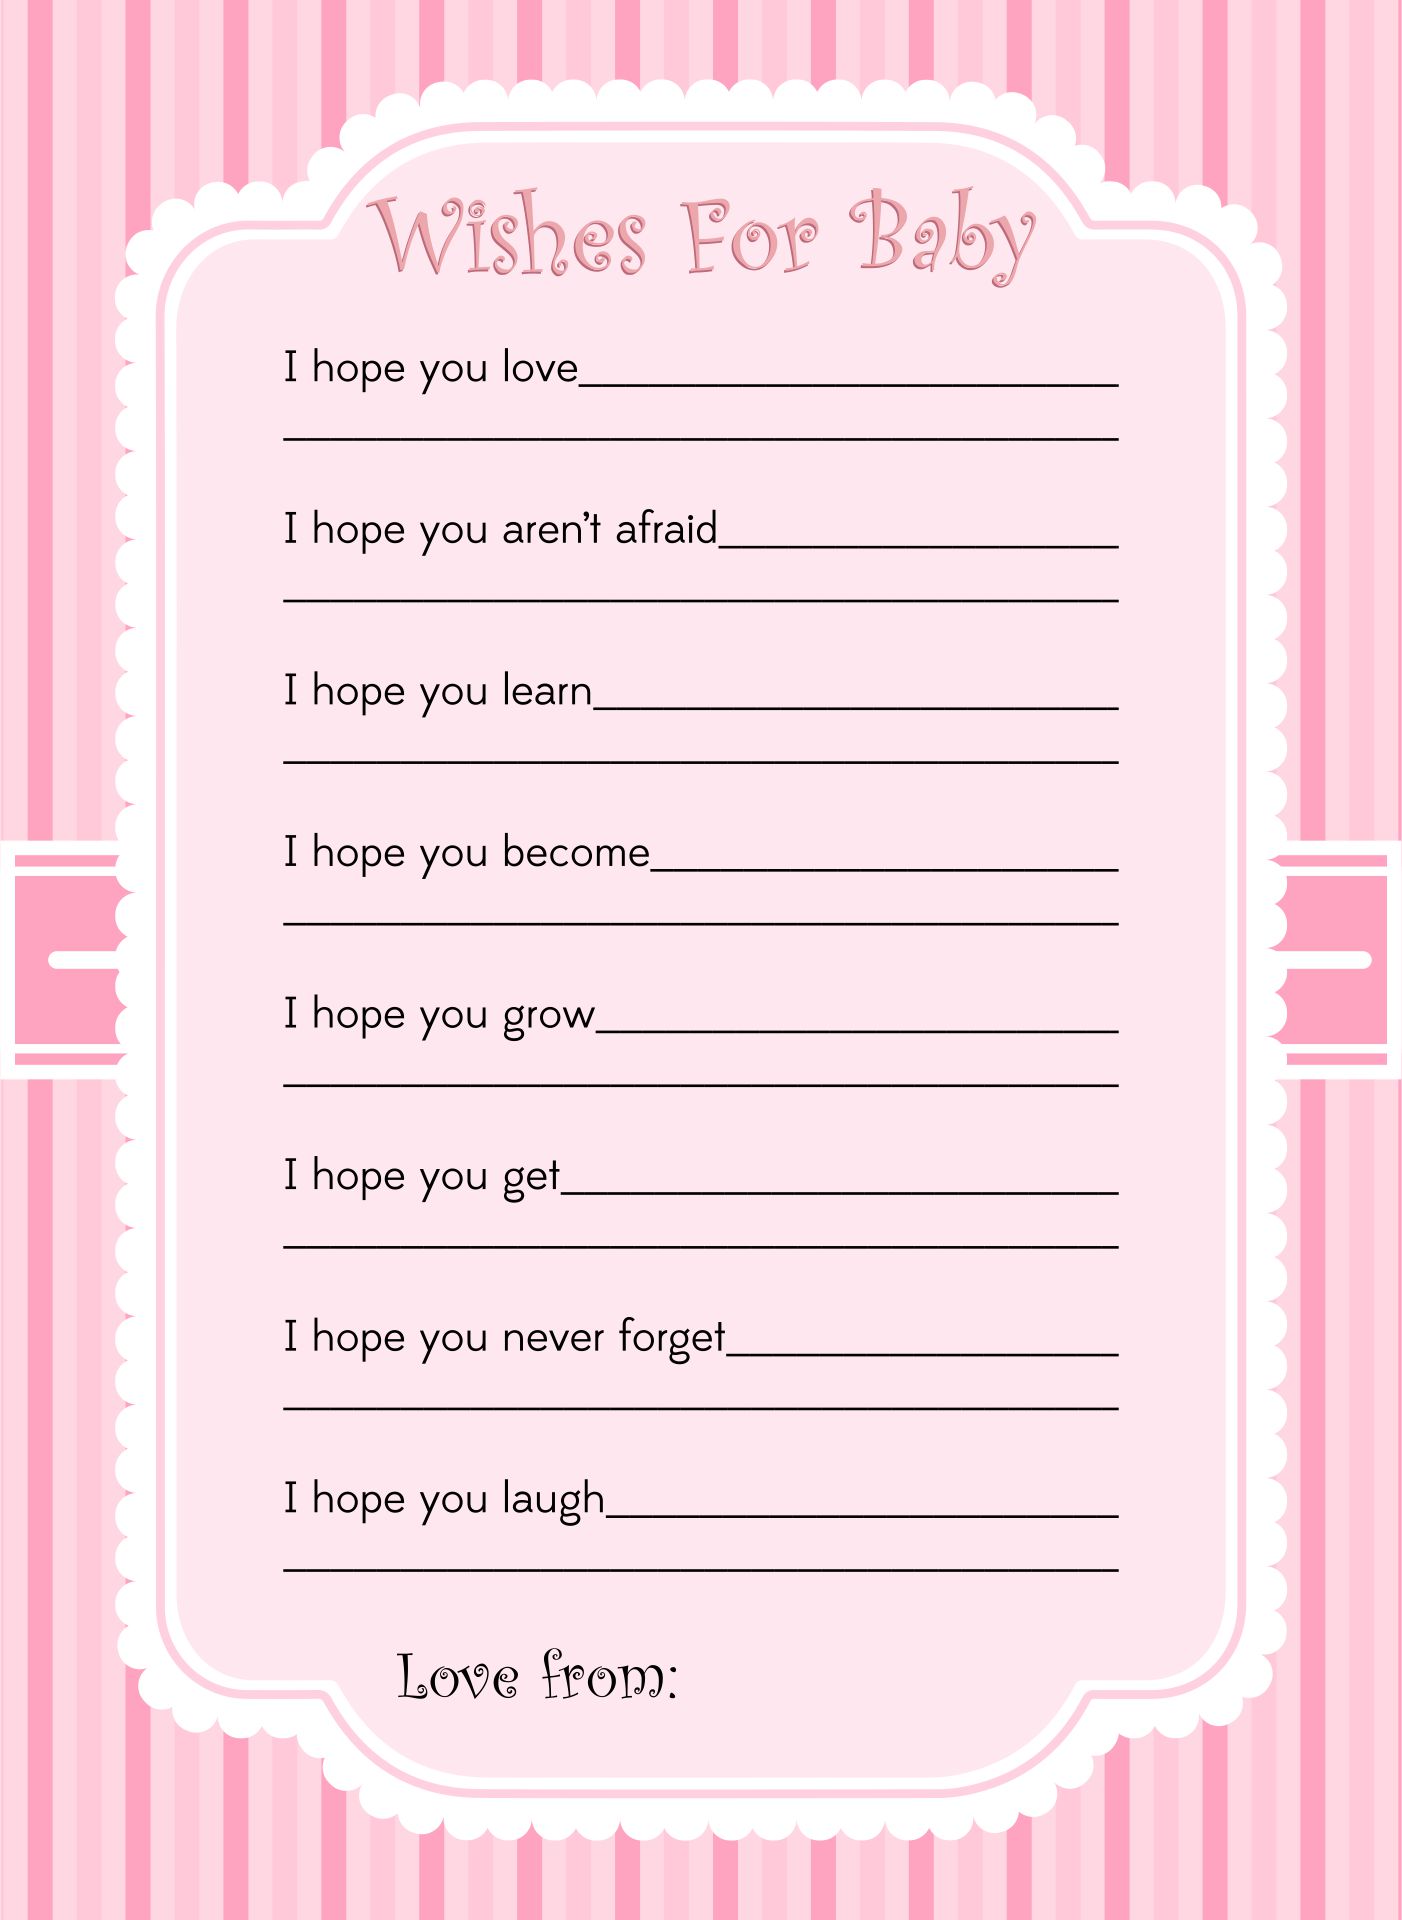 Wishes for Baby Shower Game Printable